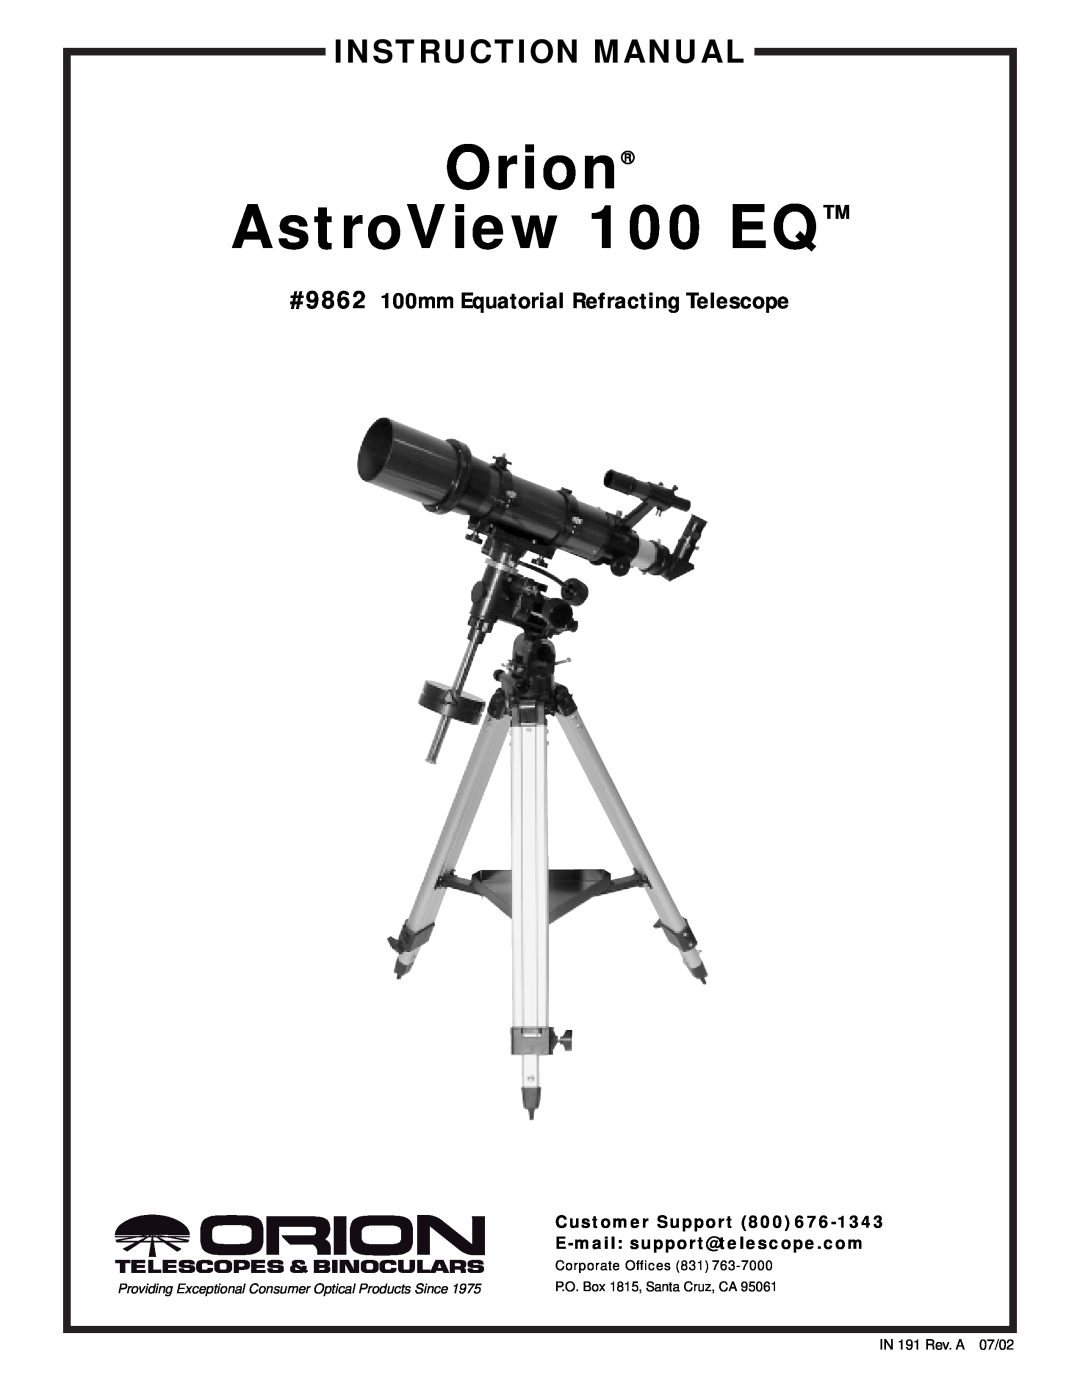 Orion instruction manual #9862 100mm Equatorial Refracting Telescope, Orion AstroView 100 EQ, Instruction Manual 